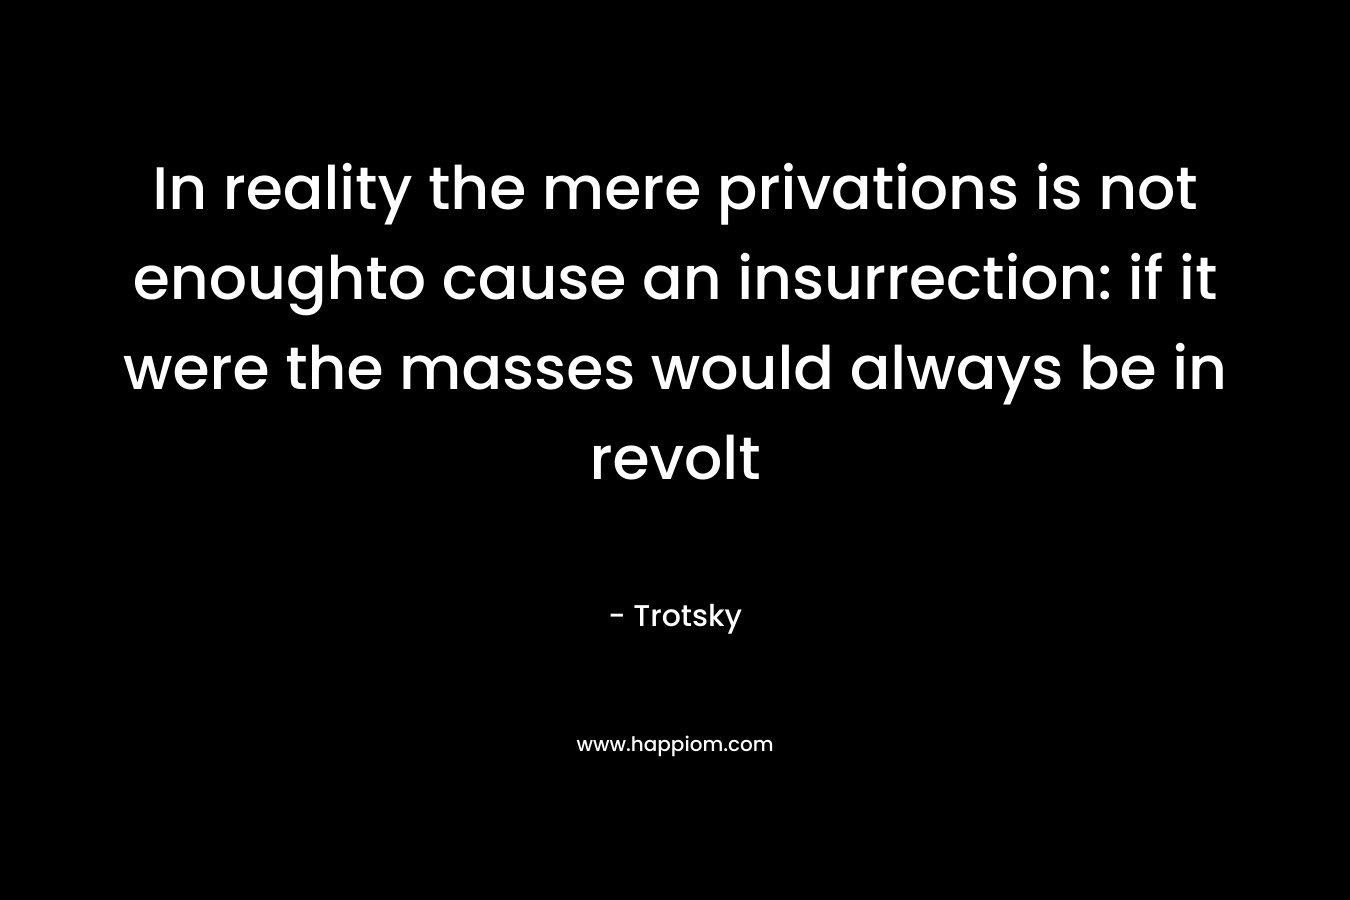 In reality the mere privations is not enoughto cause an insurrection: if it were the masses would always be in revolt – Trotsky